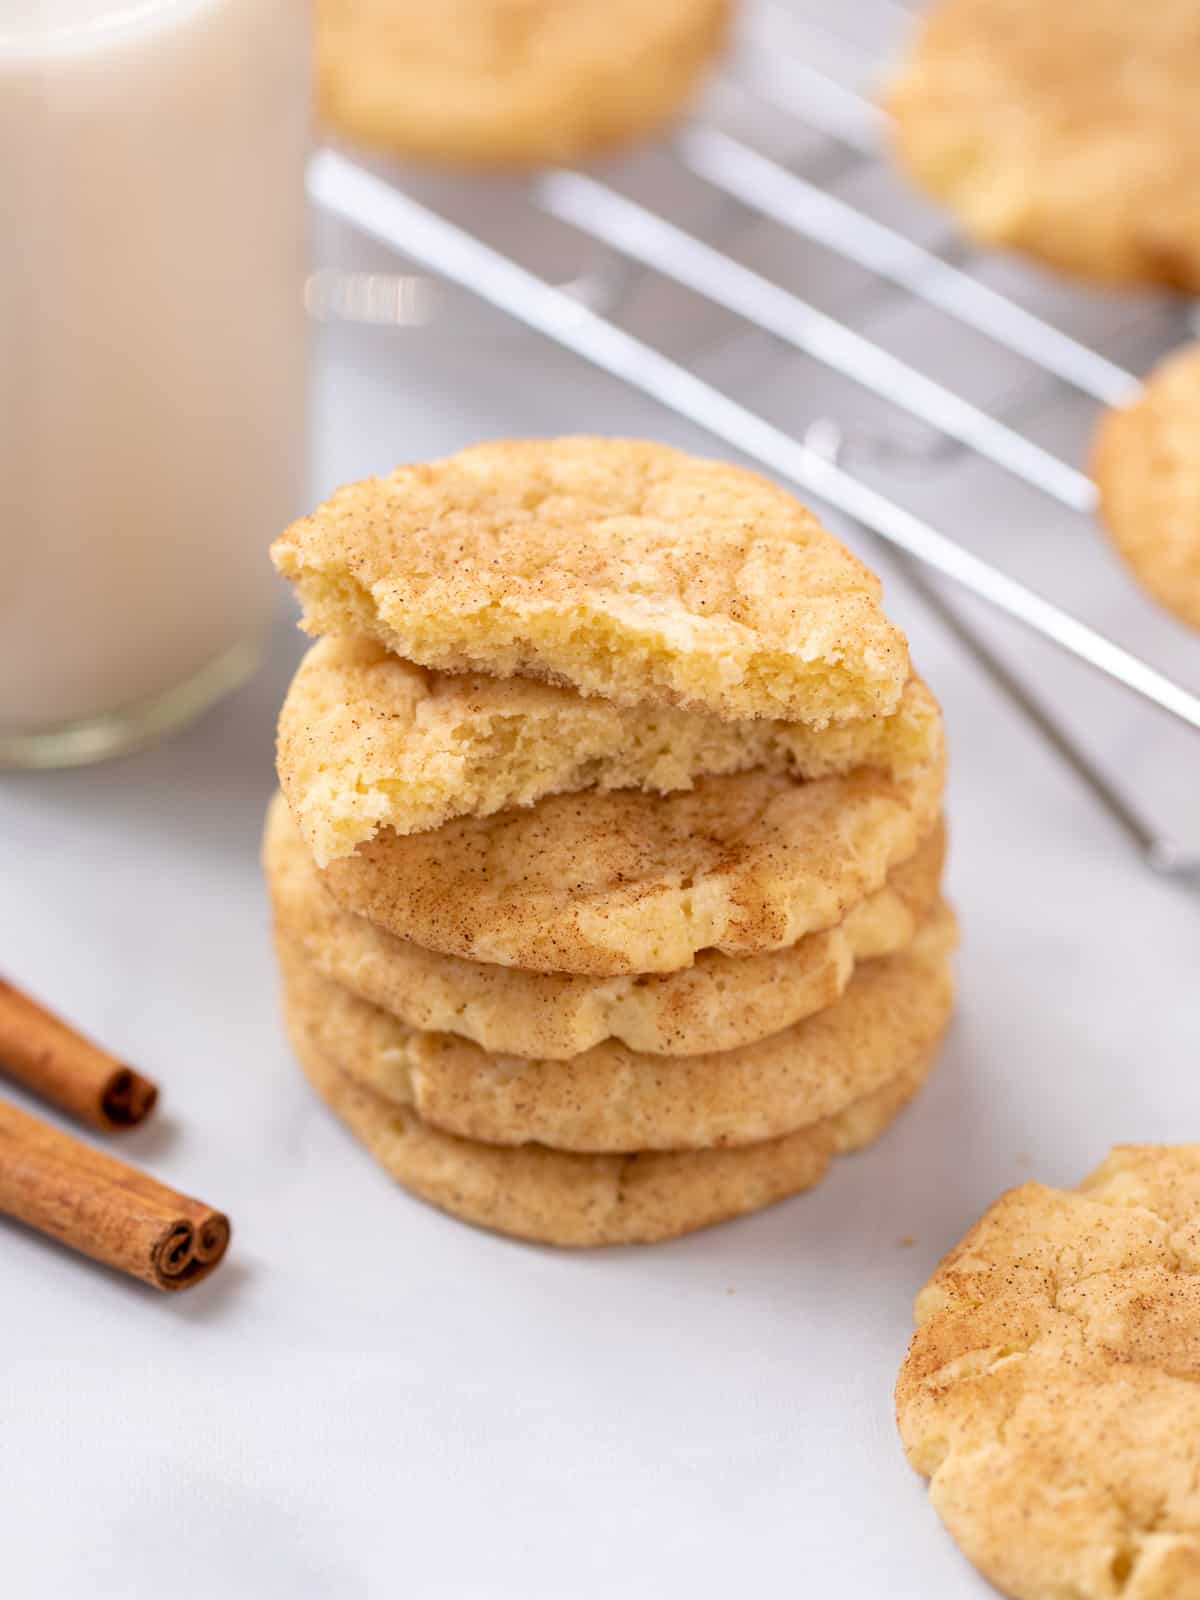 Stack of snickerdoodle cookies next to glass of milk and cinnamon sticks.